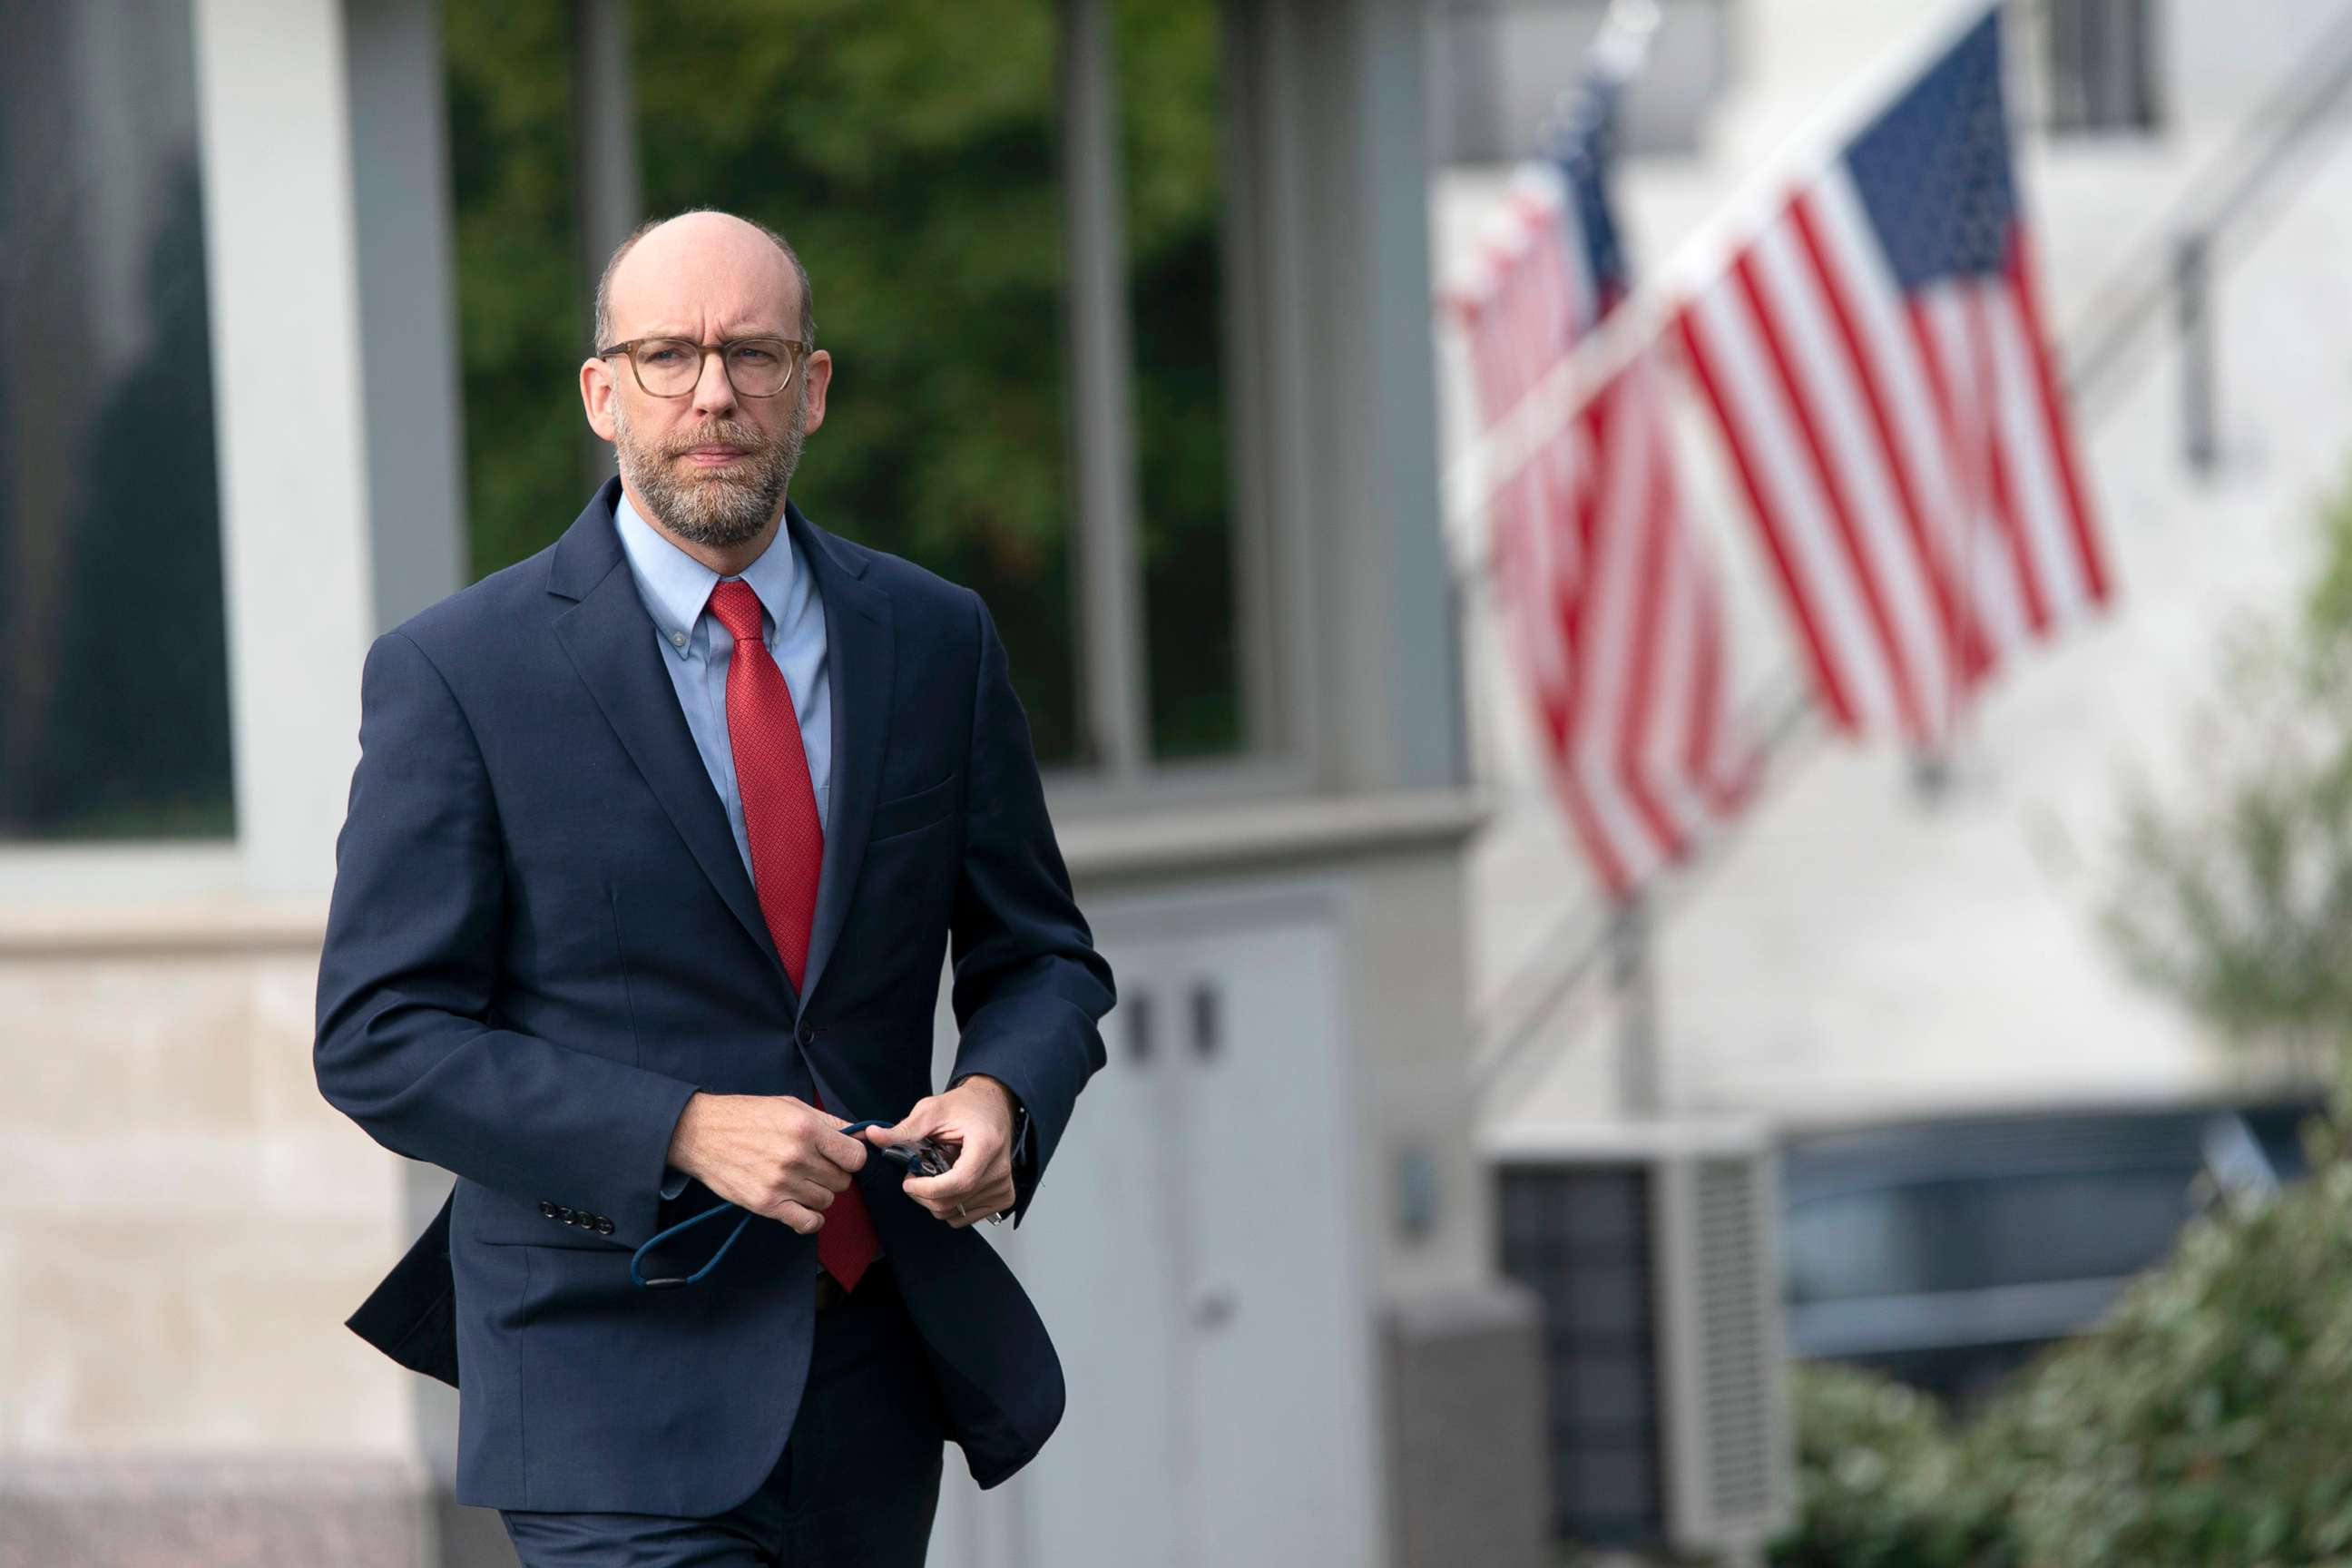 PHOTO: Office of Management and Budget (OMB) Acting Director Russell Vought walks from the White House to participate in a television interview, Oct. 9, 2019.